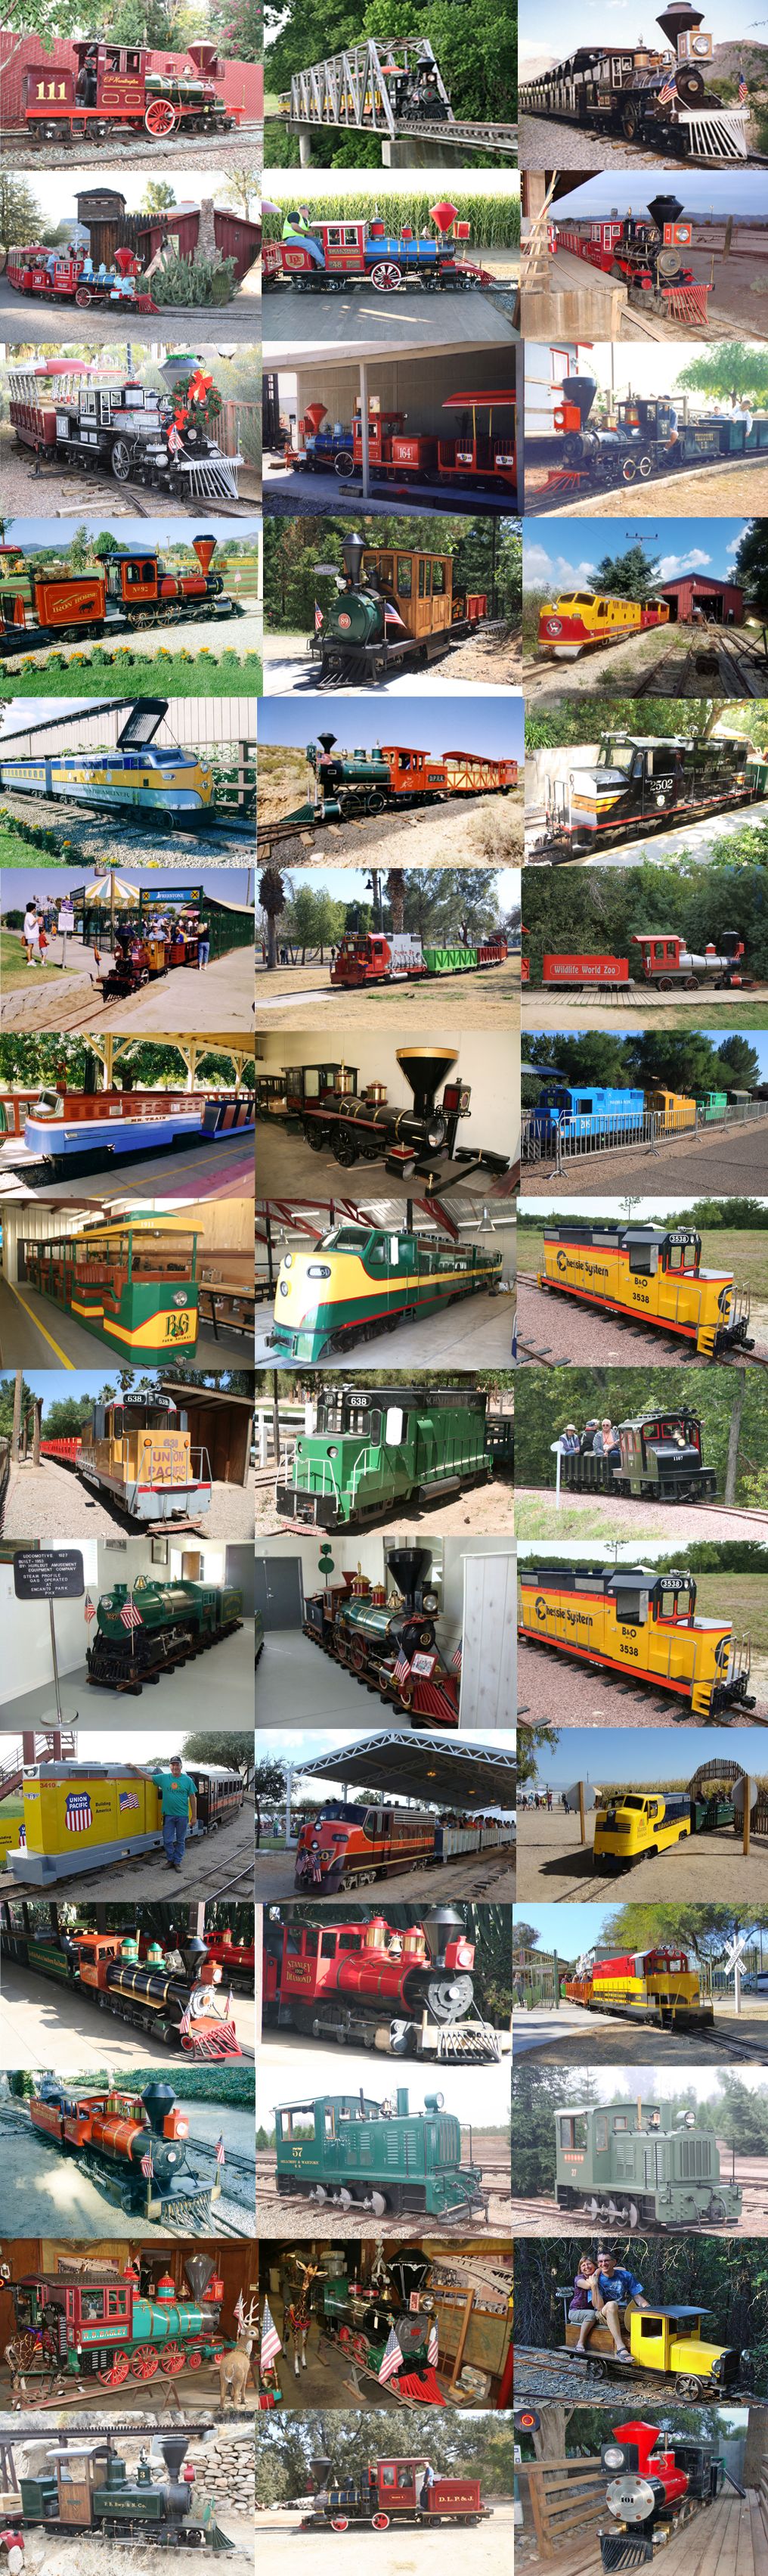 Various engines Visited